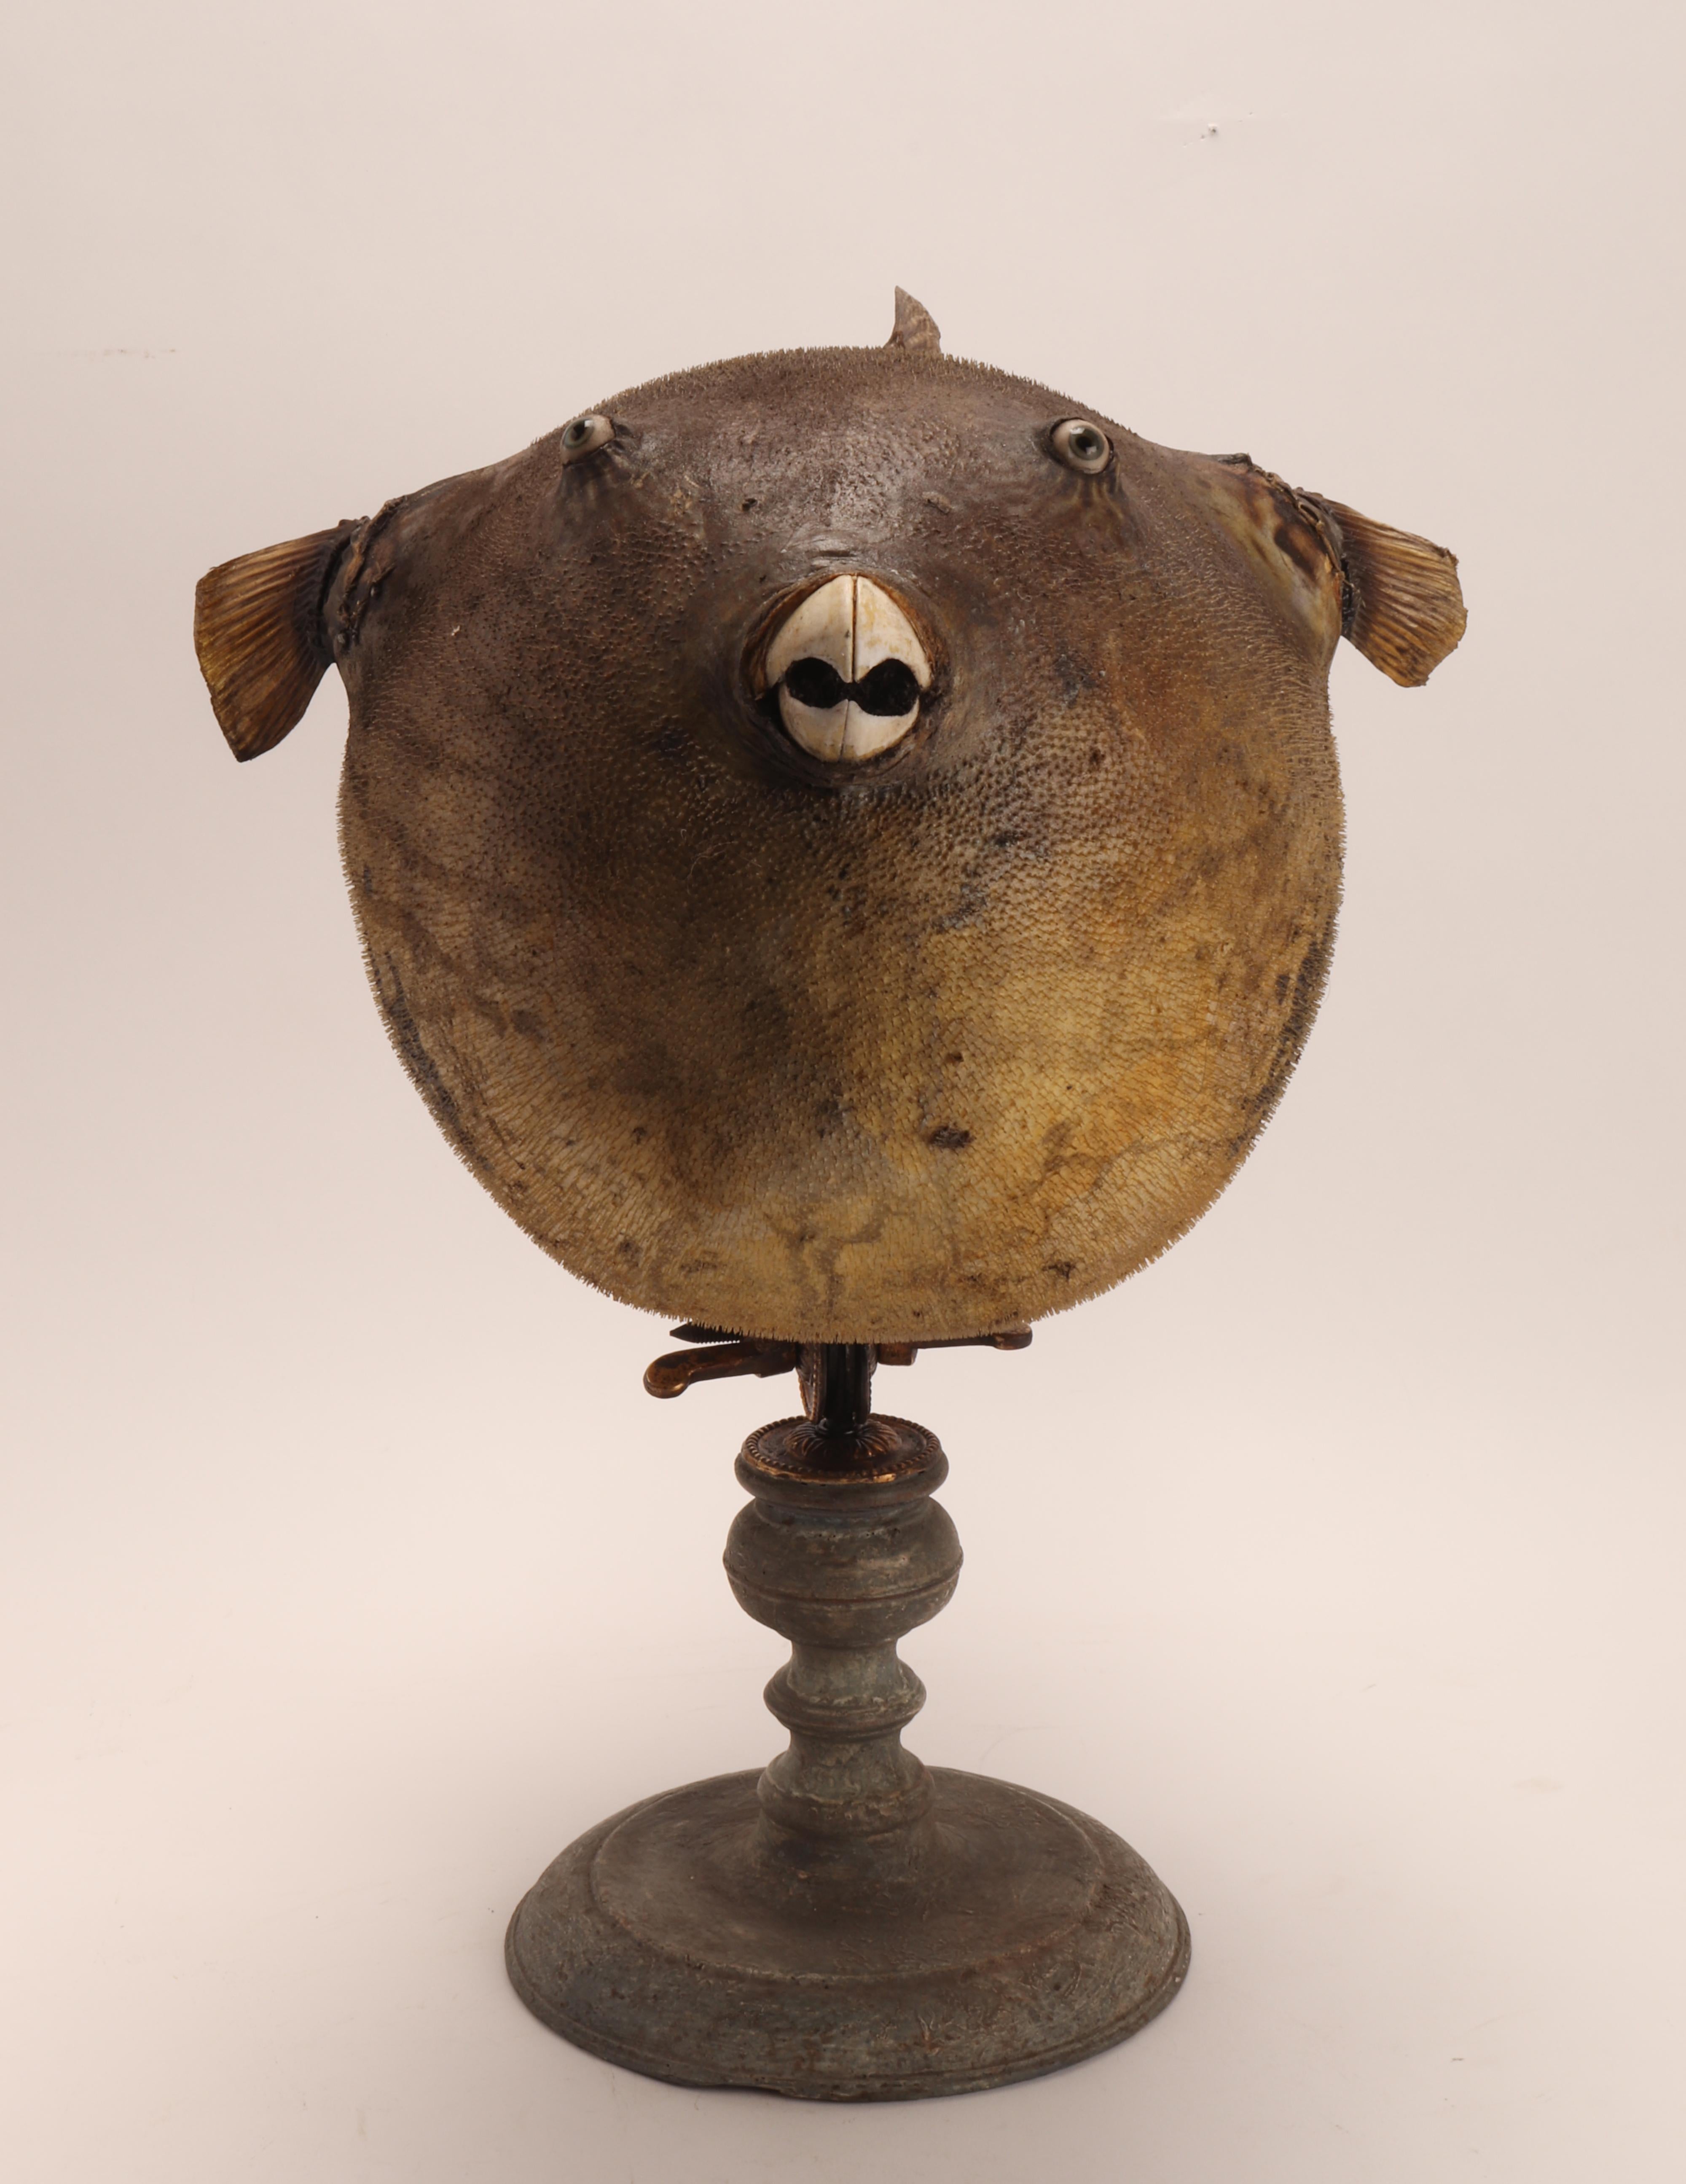 Taxidermy marine natural Wunderkammer specimen, the common Puffer fish Tetradontidae. The Specimen is stuffed and mounted over a base that rotates 360 degrees on its own axis and tilts and locked with a double-wing brass hinge. The rotating base is